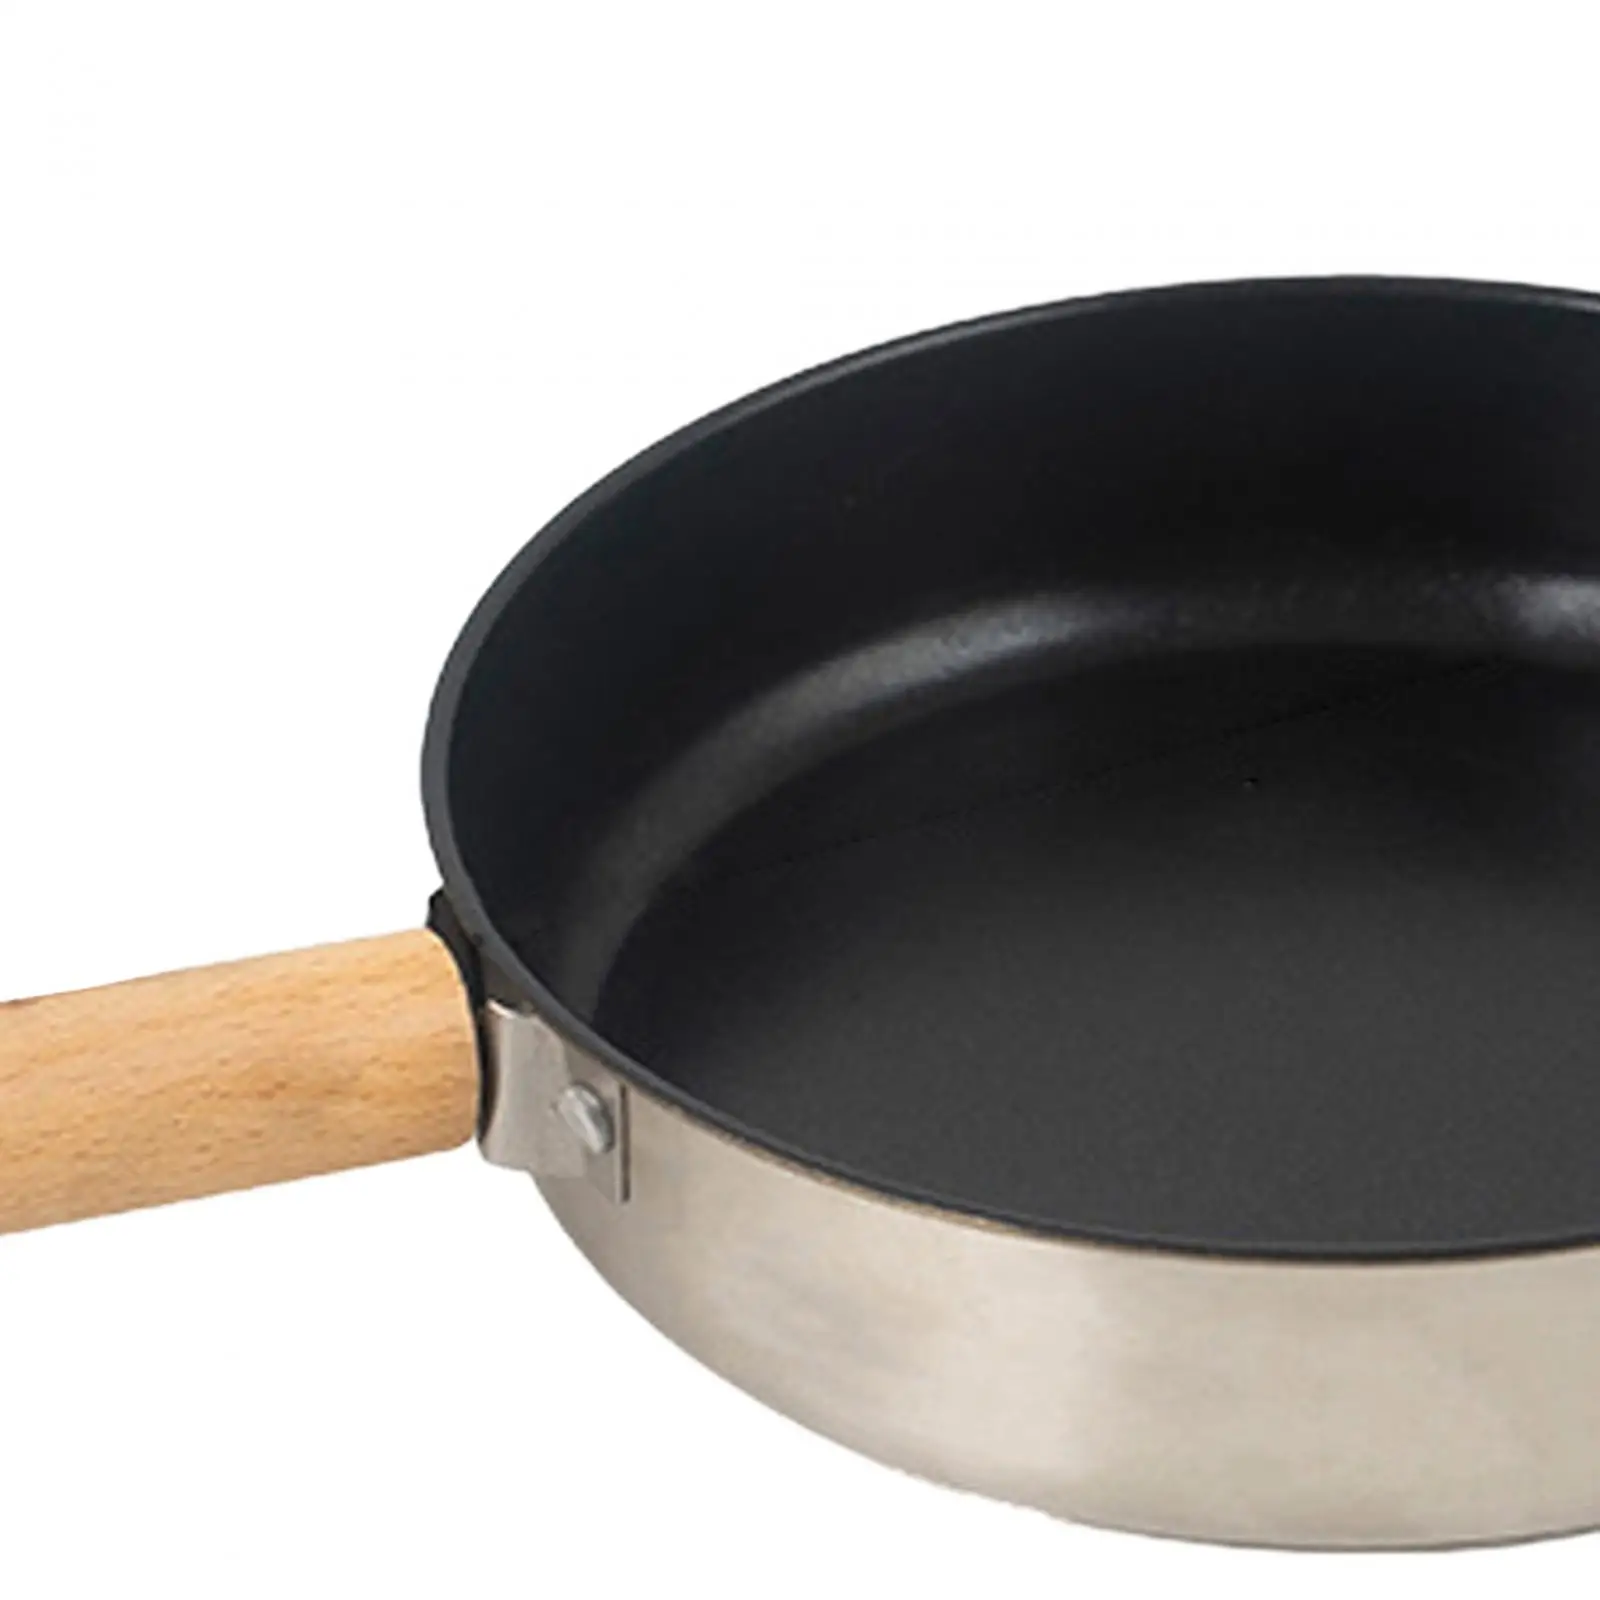 Non Stick Frying Pan Tableware Cooker Fry Pan Nonstick Flat Griddle Pan for